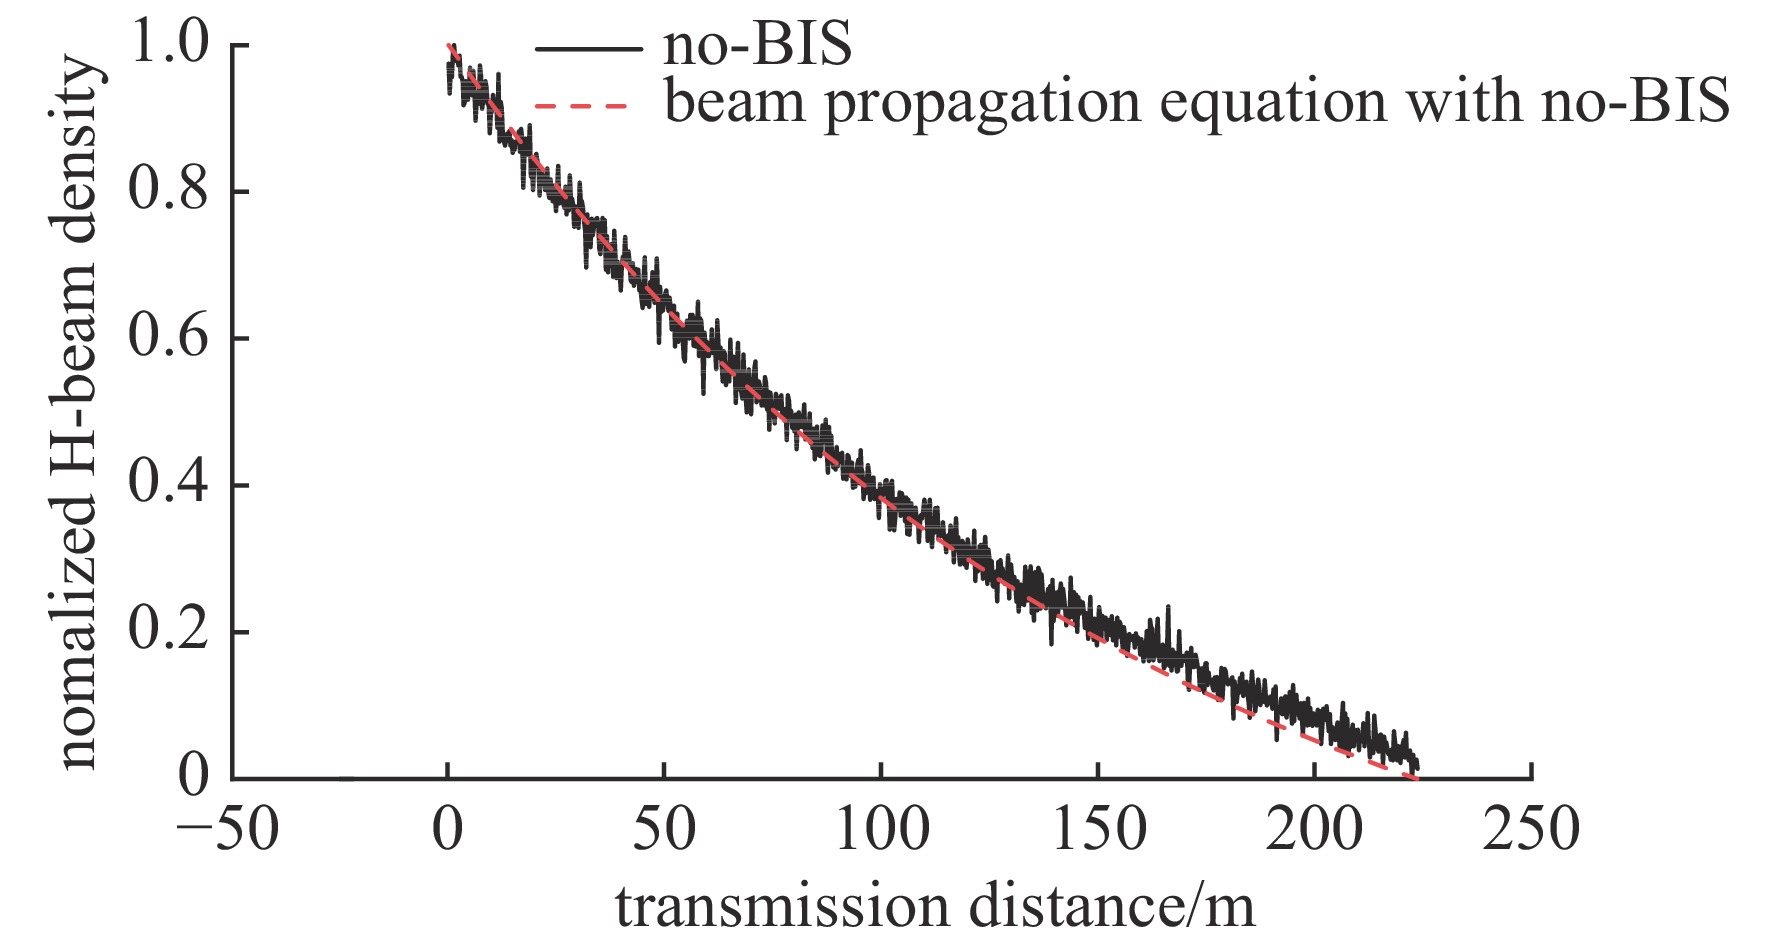 Comparison between PIC-MCC simulation results and beam propagation equation without considering self-stripping